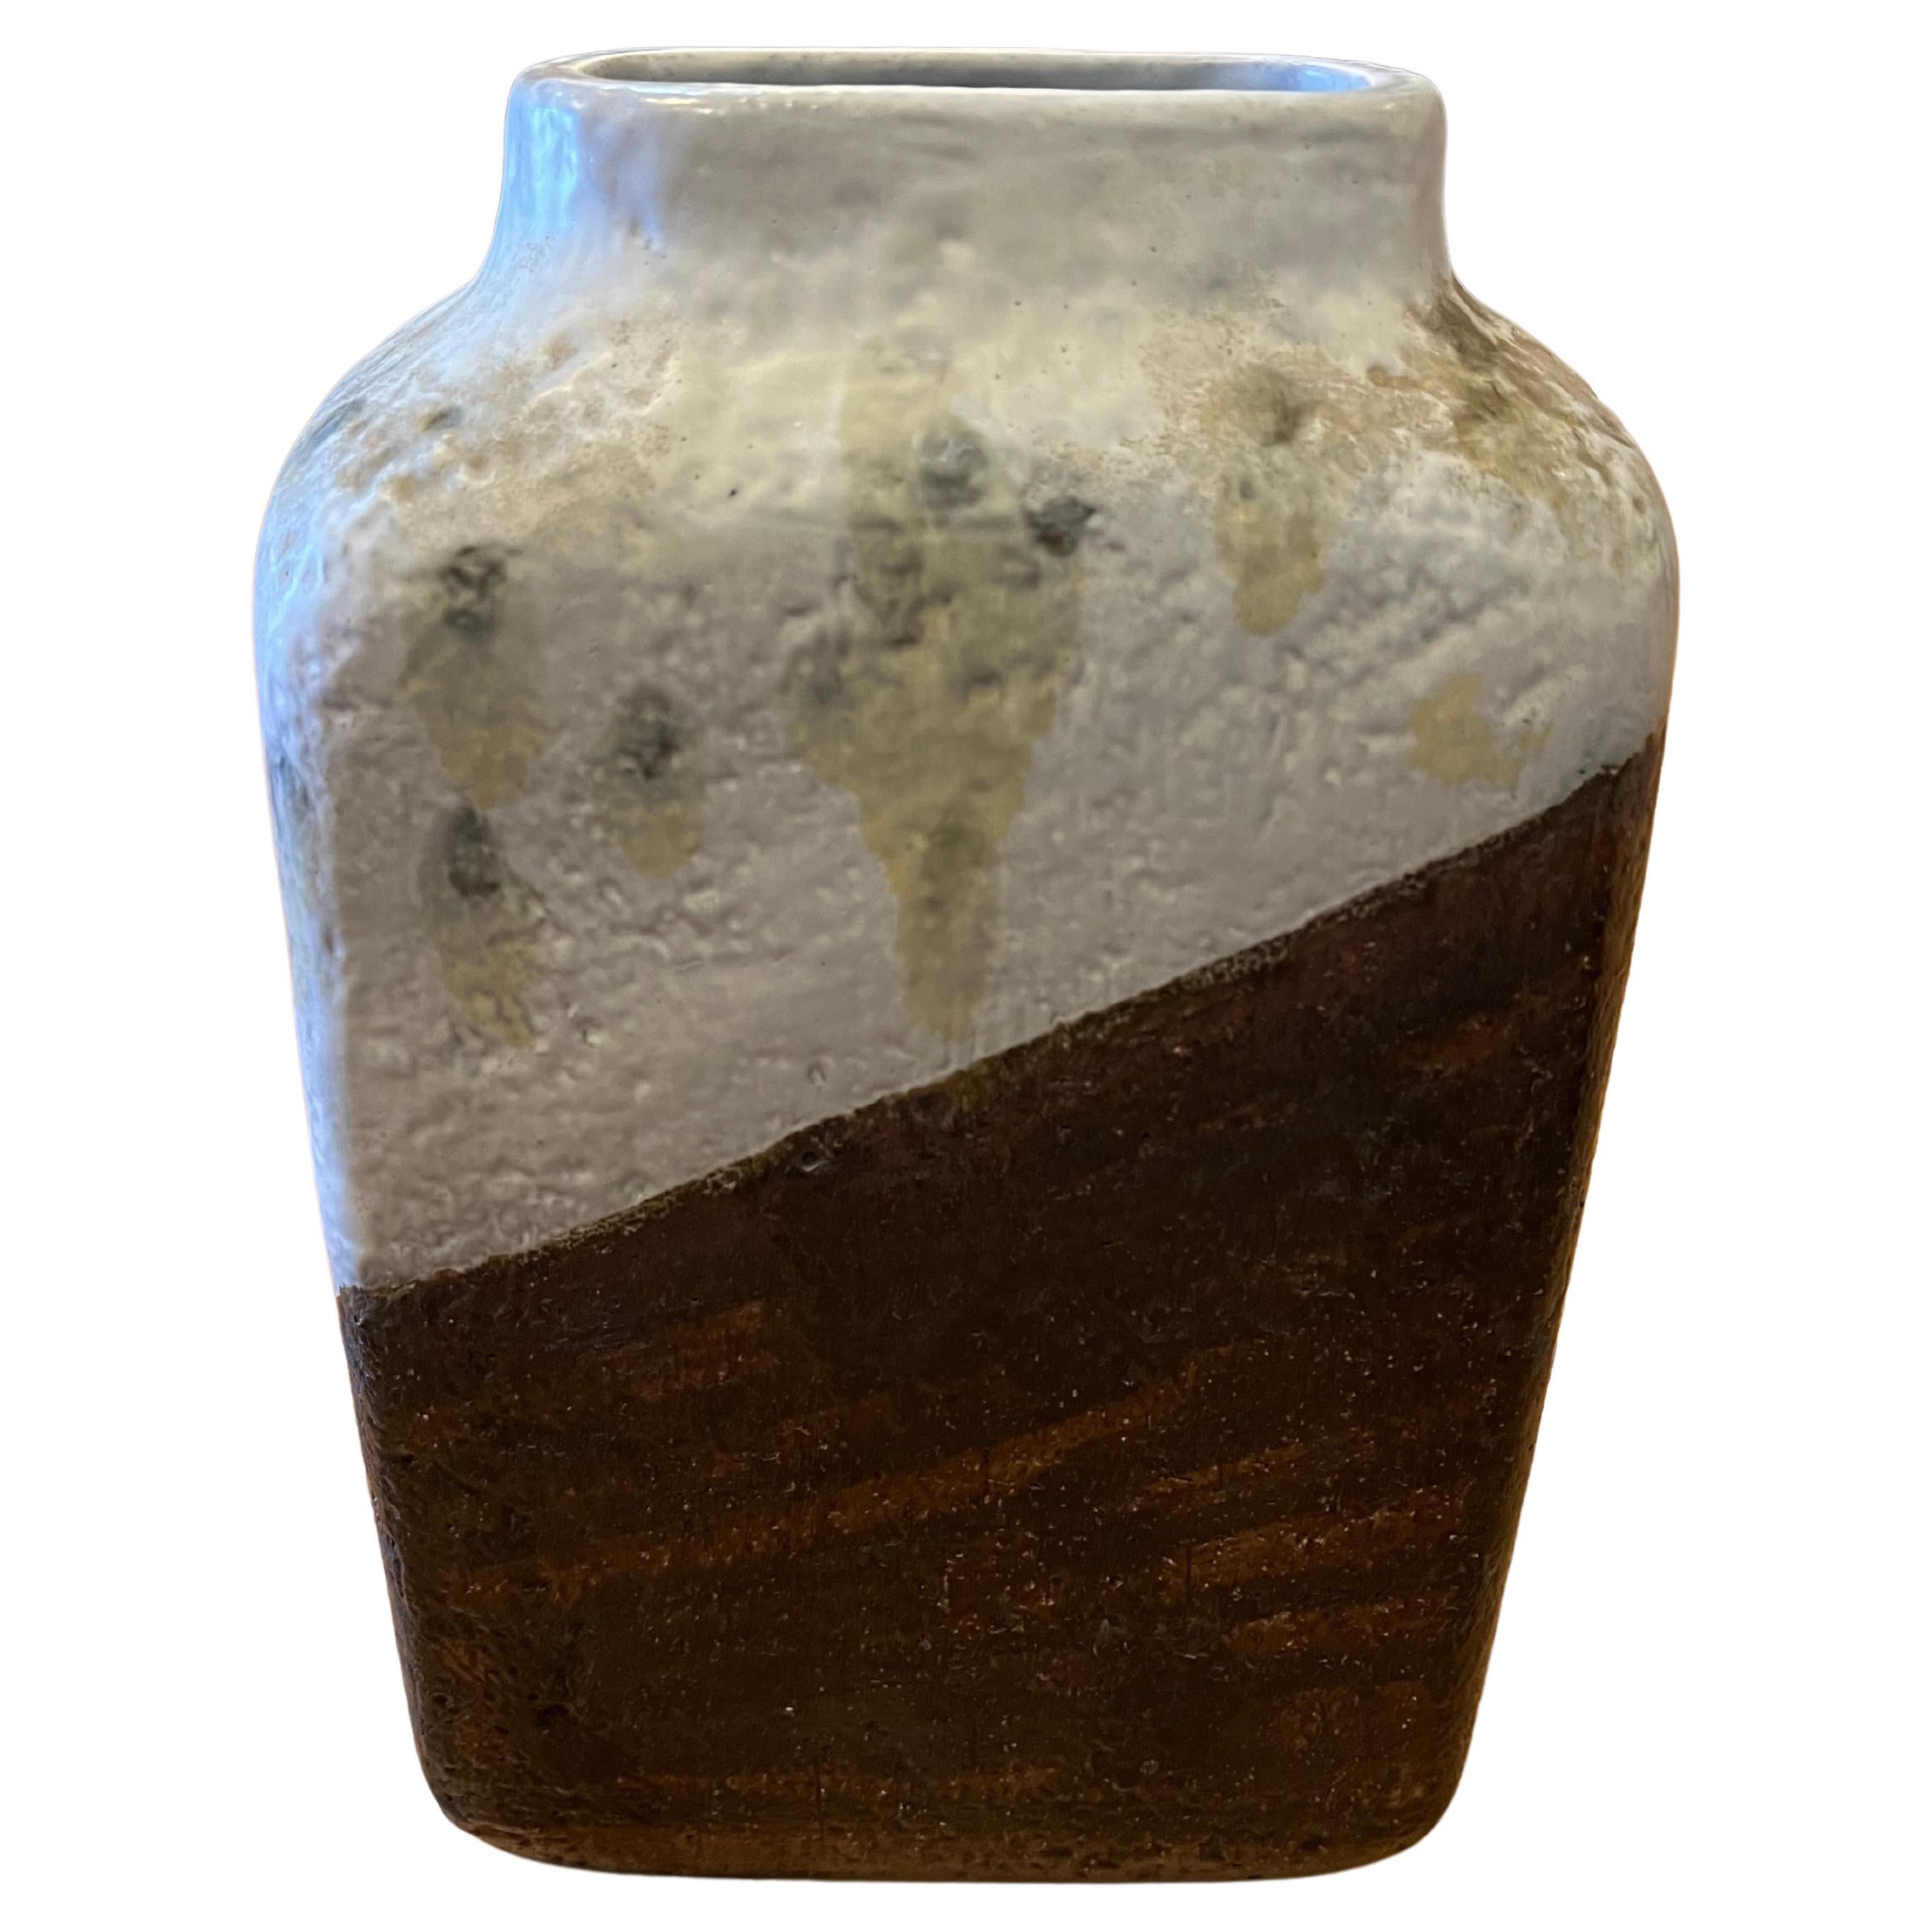 

Immerse your space in the timeless allure of mid-century Italian craftsmanship with this exquisite Marcello Fantoni Bitone Vase. Crafted circa 1955, this ceramic masterpiece epitomizes Fantoni's mastery, showcasing his distinct blend of artistic